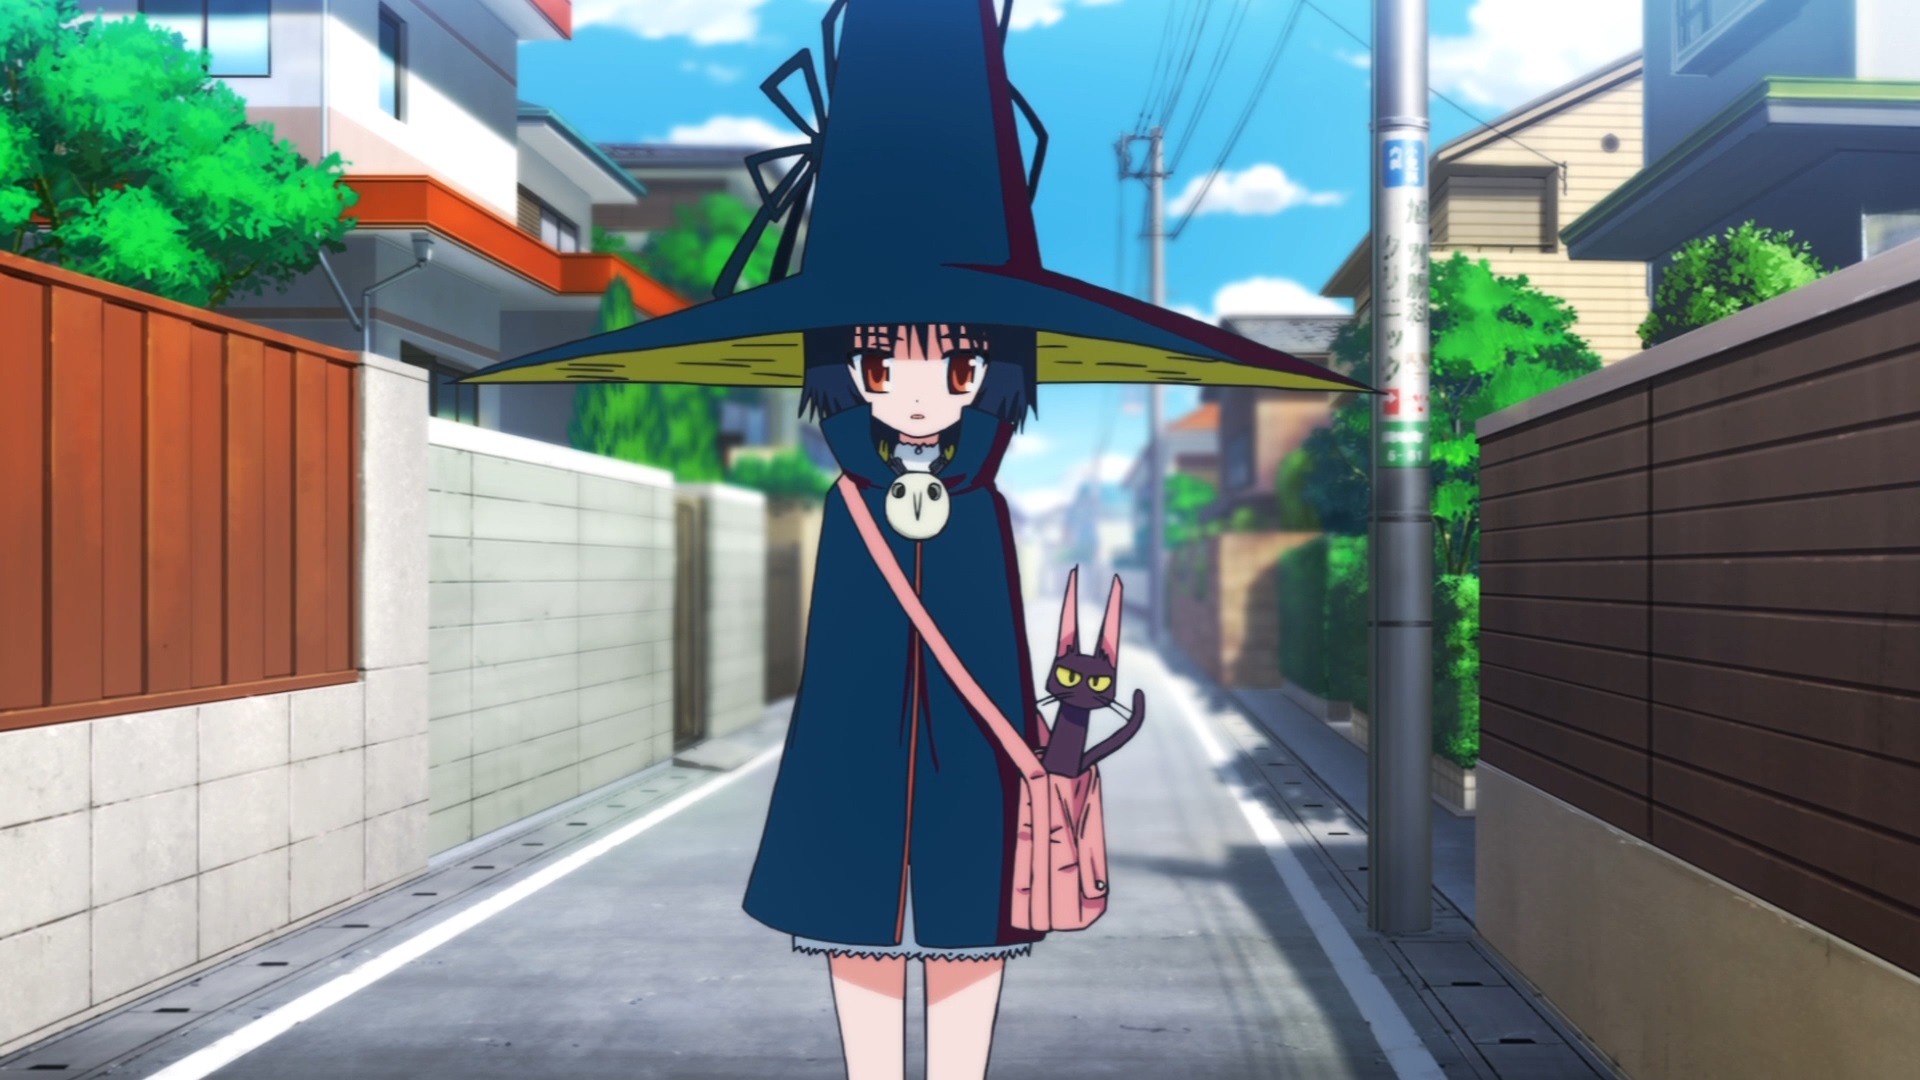 Rurumo wears a suspiciously witchy combo of large pointed hat and dark robes in a scene from the Magimoji Rurumo TV anime.